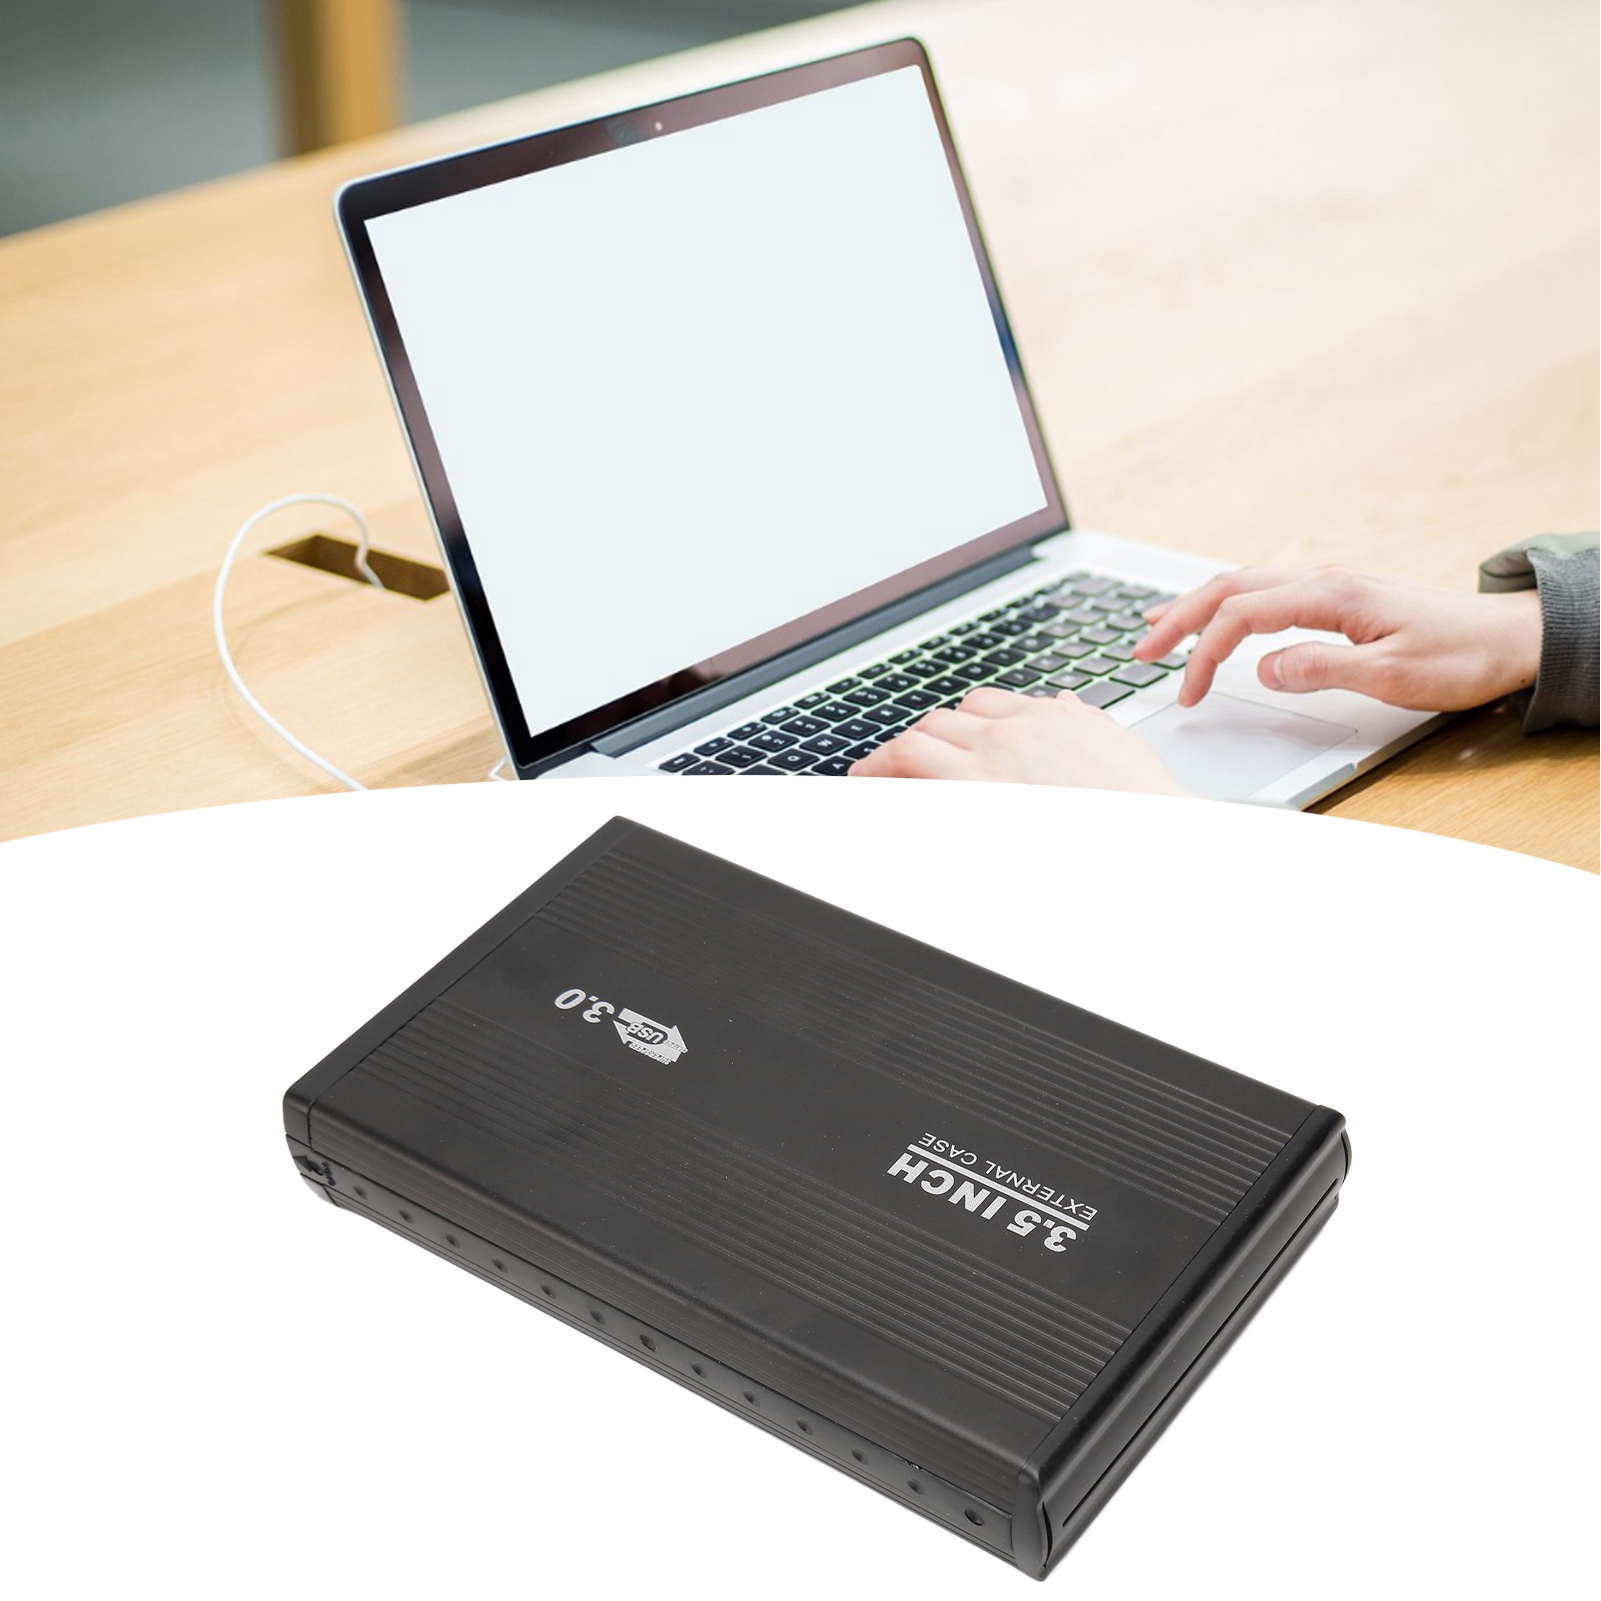 3.5in Desktop External Hard Drive 5Gbps USB 3.0 Interface Plug And Play